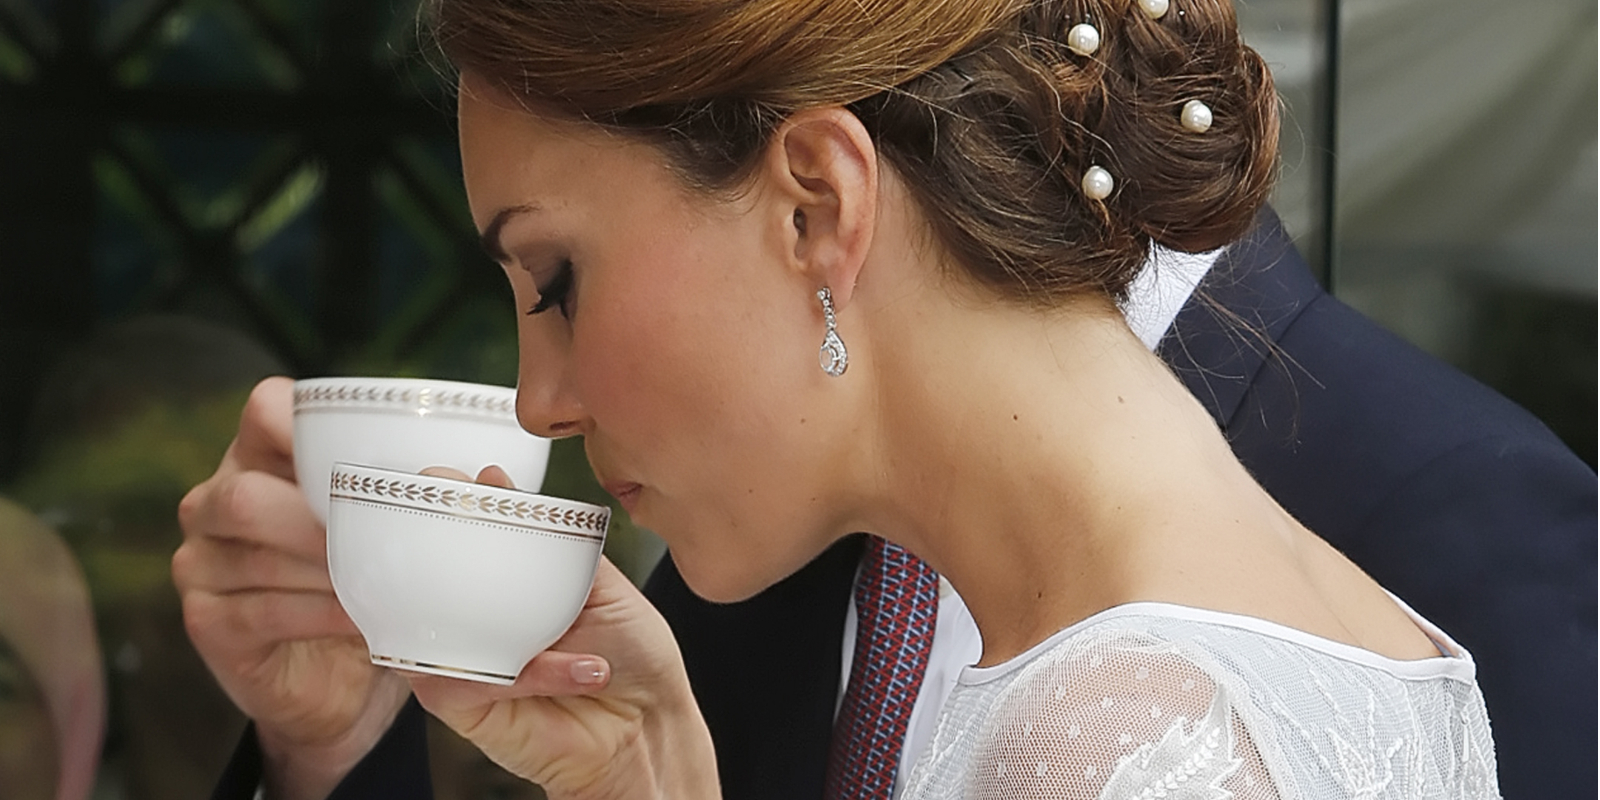 Kate Middleton drinking a cup of tea at a formal event.